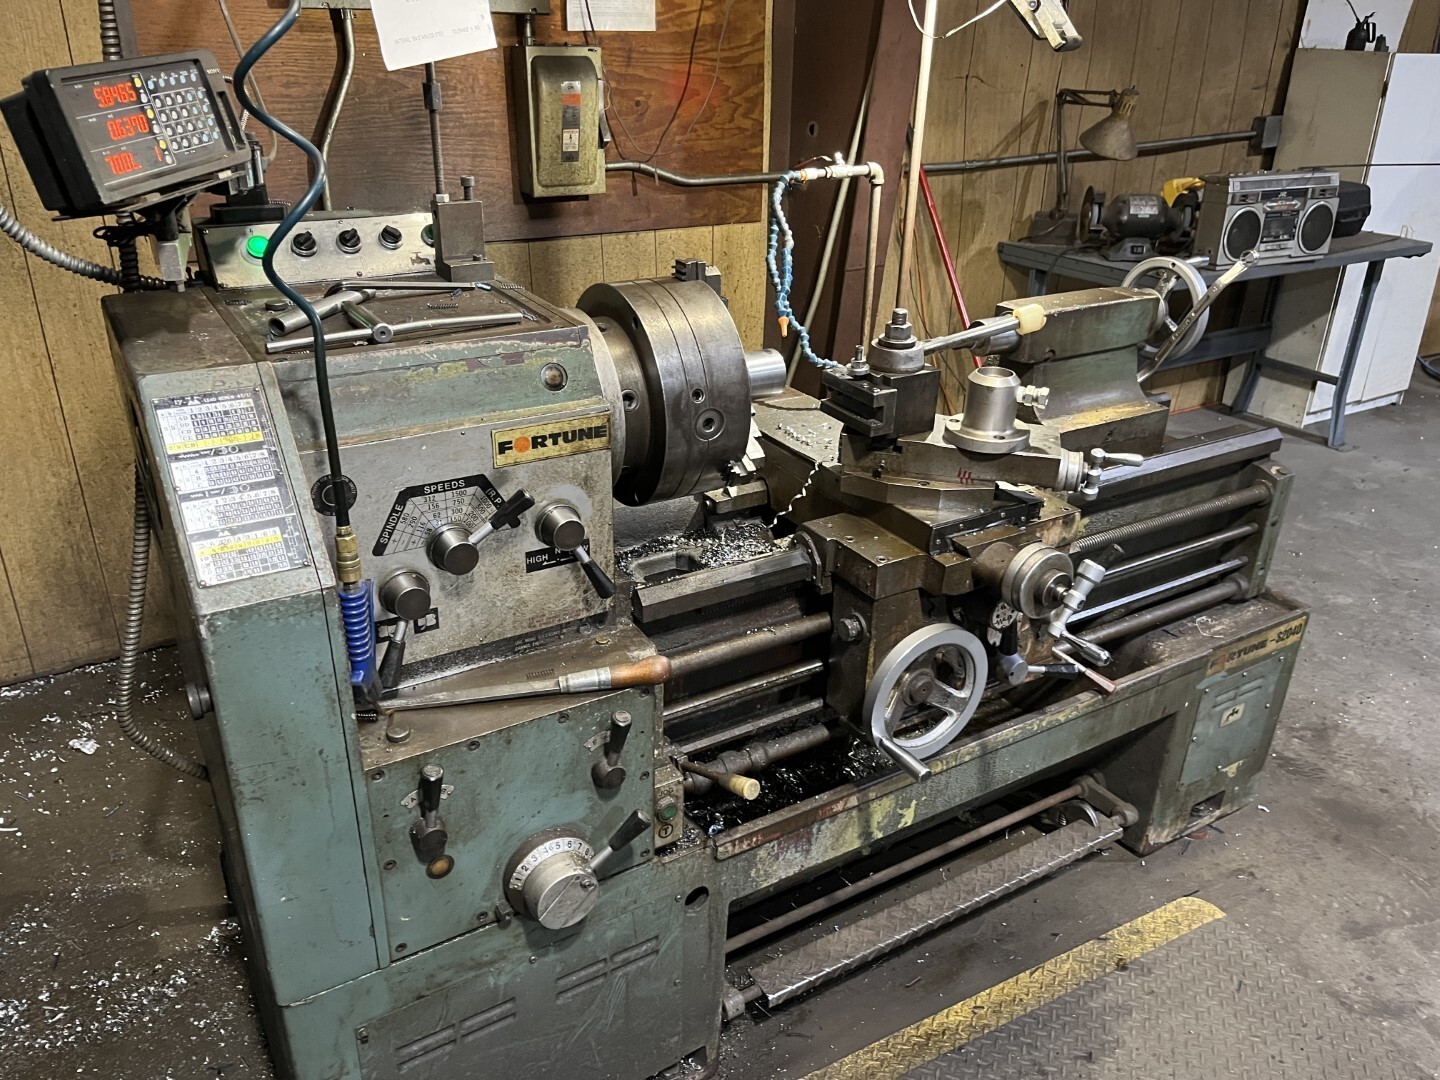 FORTUNE s2040 Engine Lathes | 520 Machinery Sales LLC